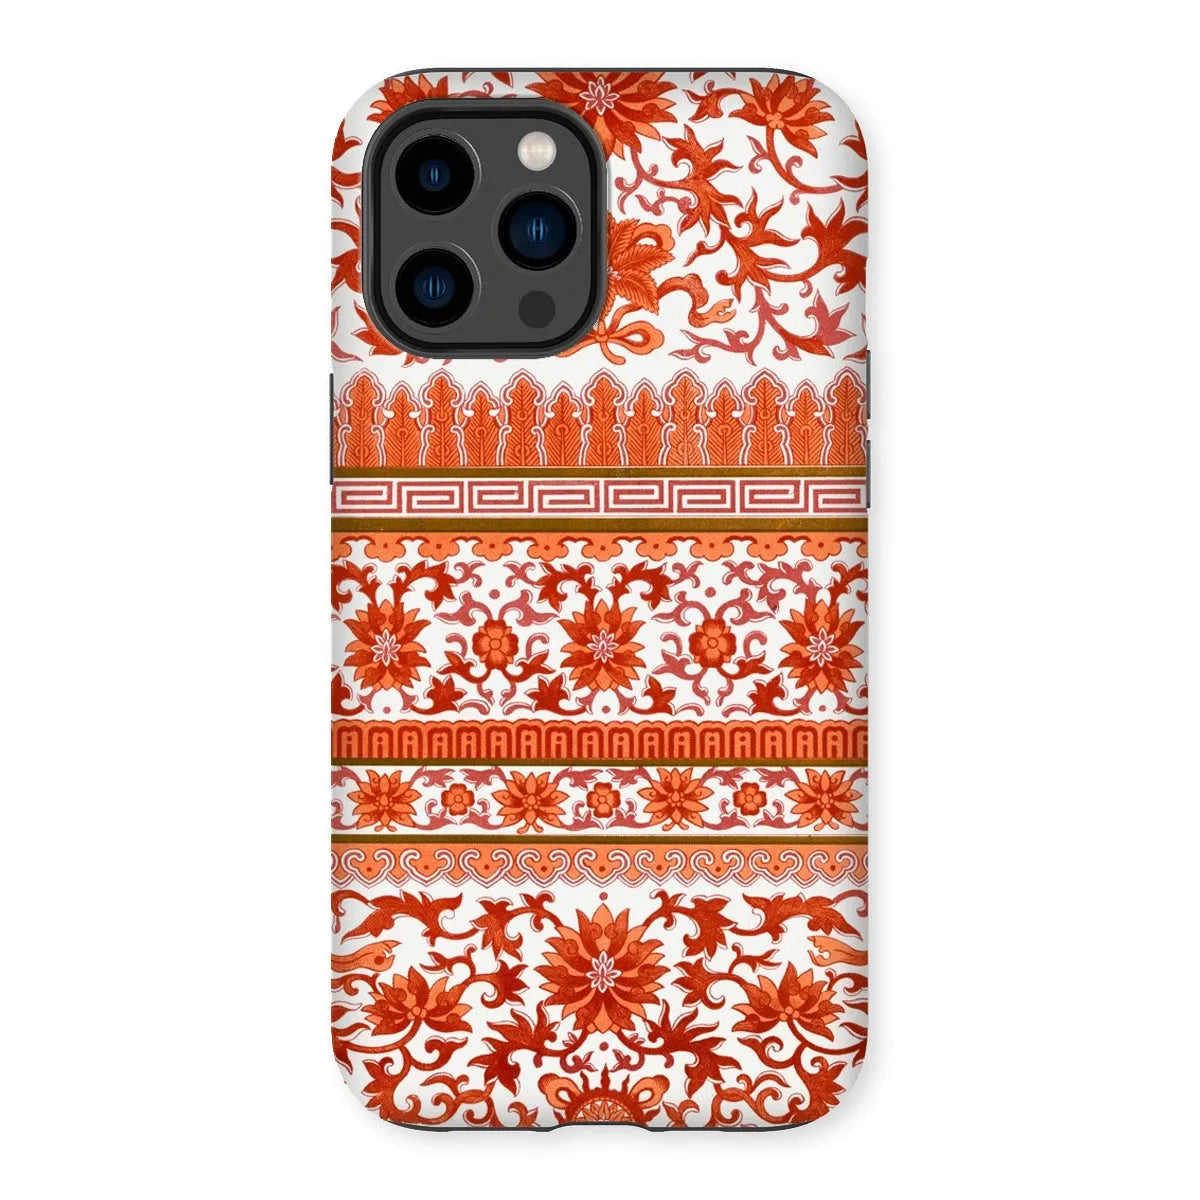 Fiery Chinese Floral Aesthetic Art Phone Case - Owen Jones - Iphone 14 Pro Max / Matte - Mobile Phone Cases - Aesthetic